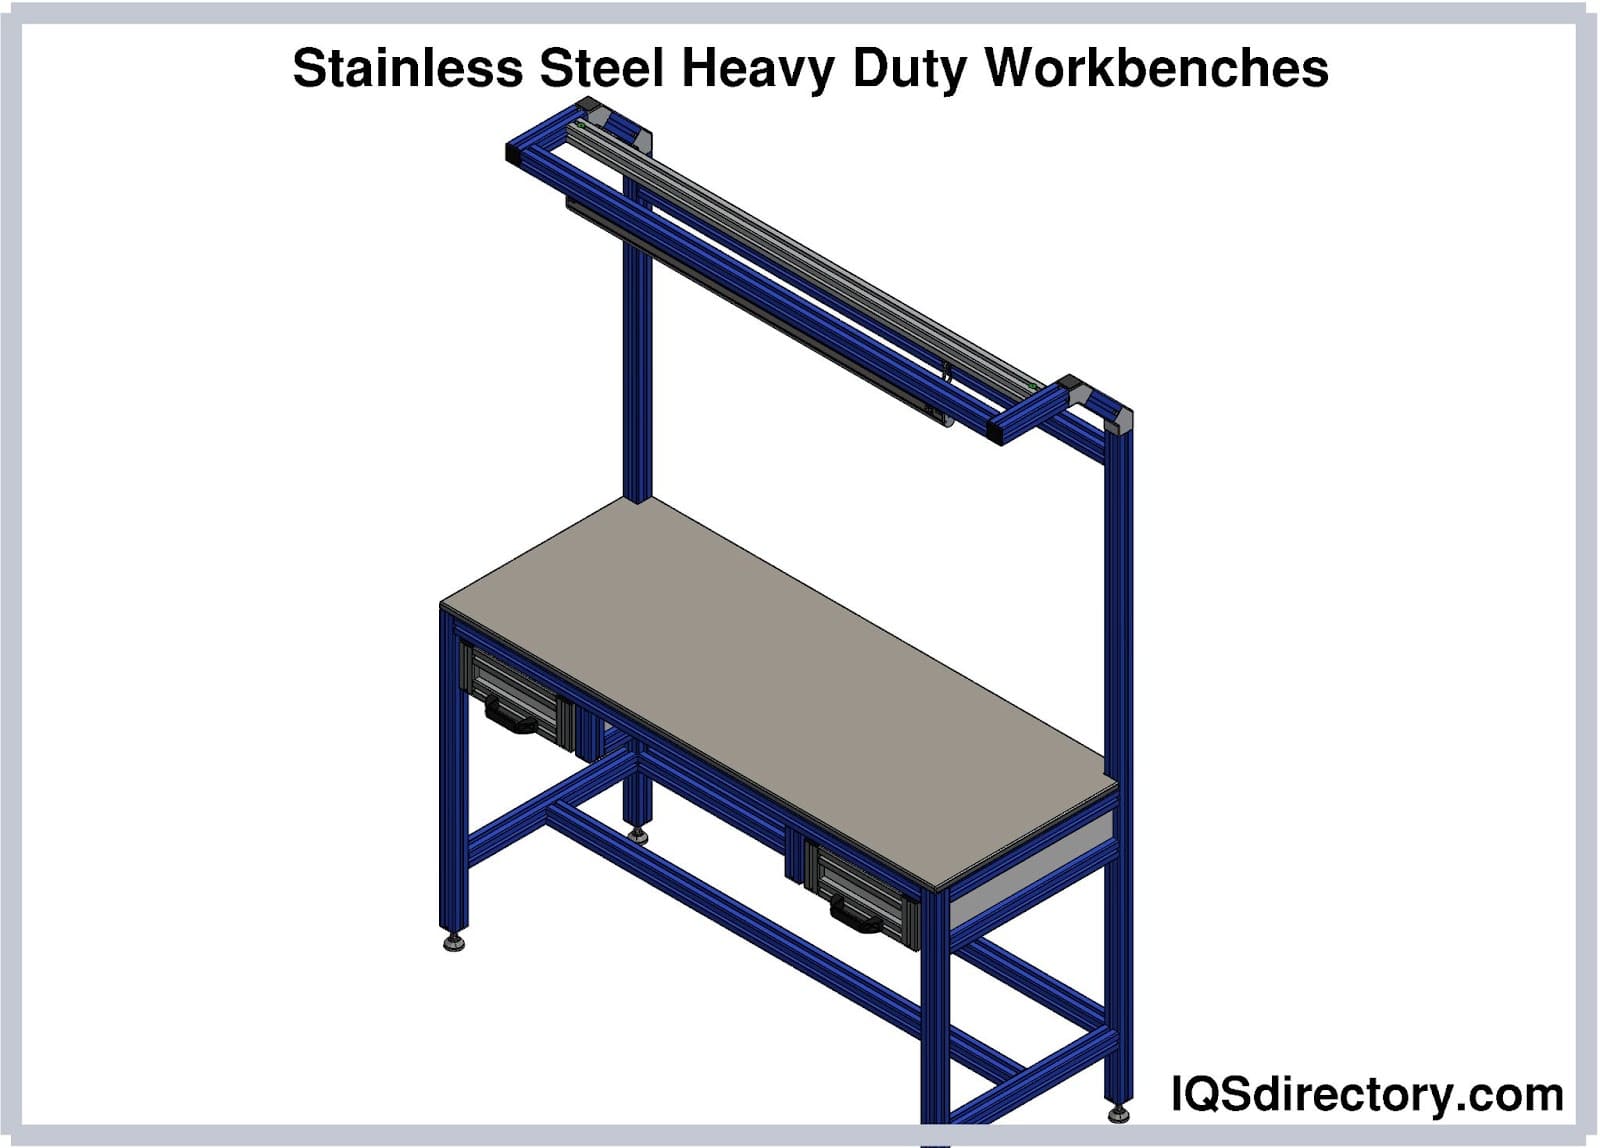 https://www.workbenchmanufacturers.com/wp-content/uploads/2022/10/stainless-steel-heavy-duty-workbenches.jpg